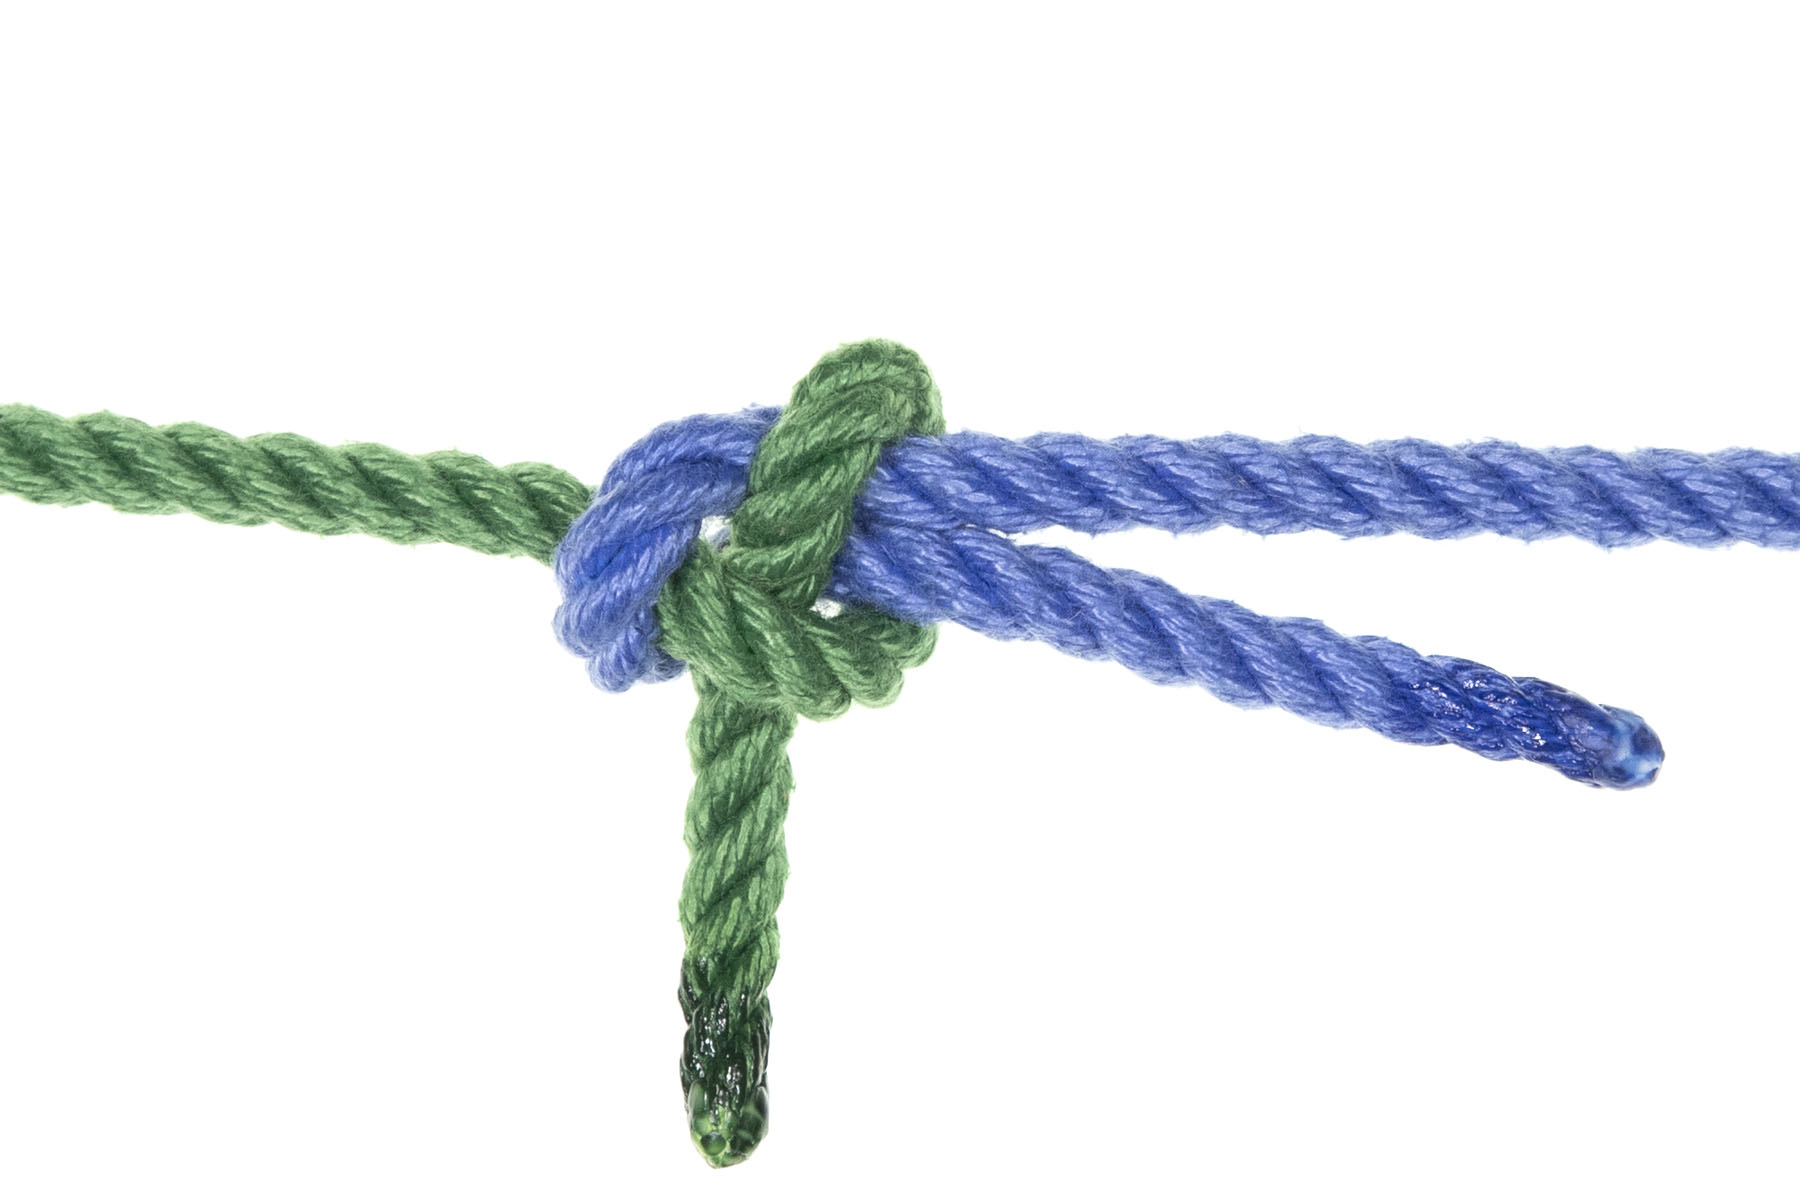 A completed sheet bend knot. A single blue rope enters from the left, connects to a single green rope that enters from the right, and then doubles back, lying next to and just below itself. The green rope goes under the bight of the blue rope, under both parts of the blue rope, the over both parts of the blue rope and under itself, with the end of the rope pointing straight down. The ends of the blue and green ropes are both below their corresponding standing parts.